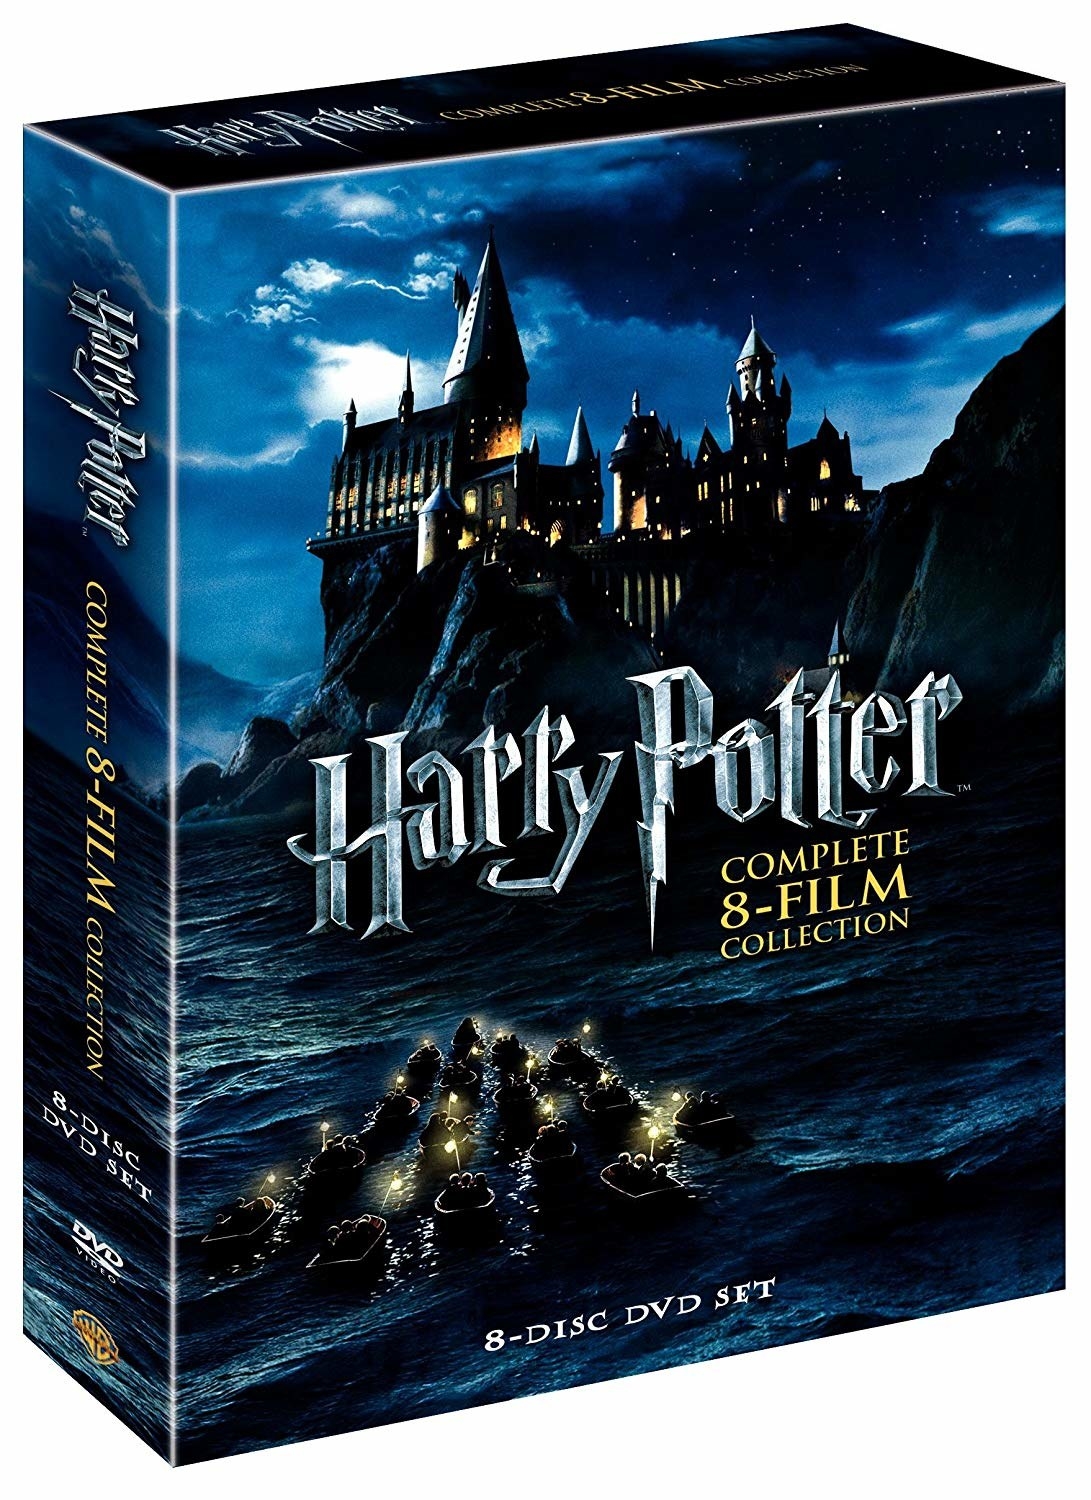 klant Bloody Soepel The Harry Potter DVD Set Is On Sale, So Swish And Flick Goes My Credit Card